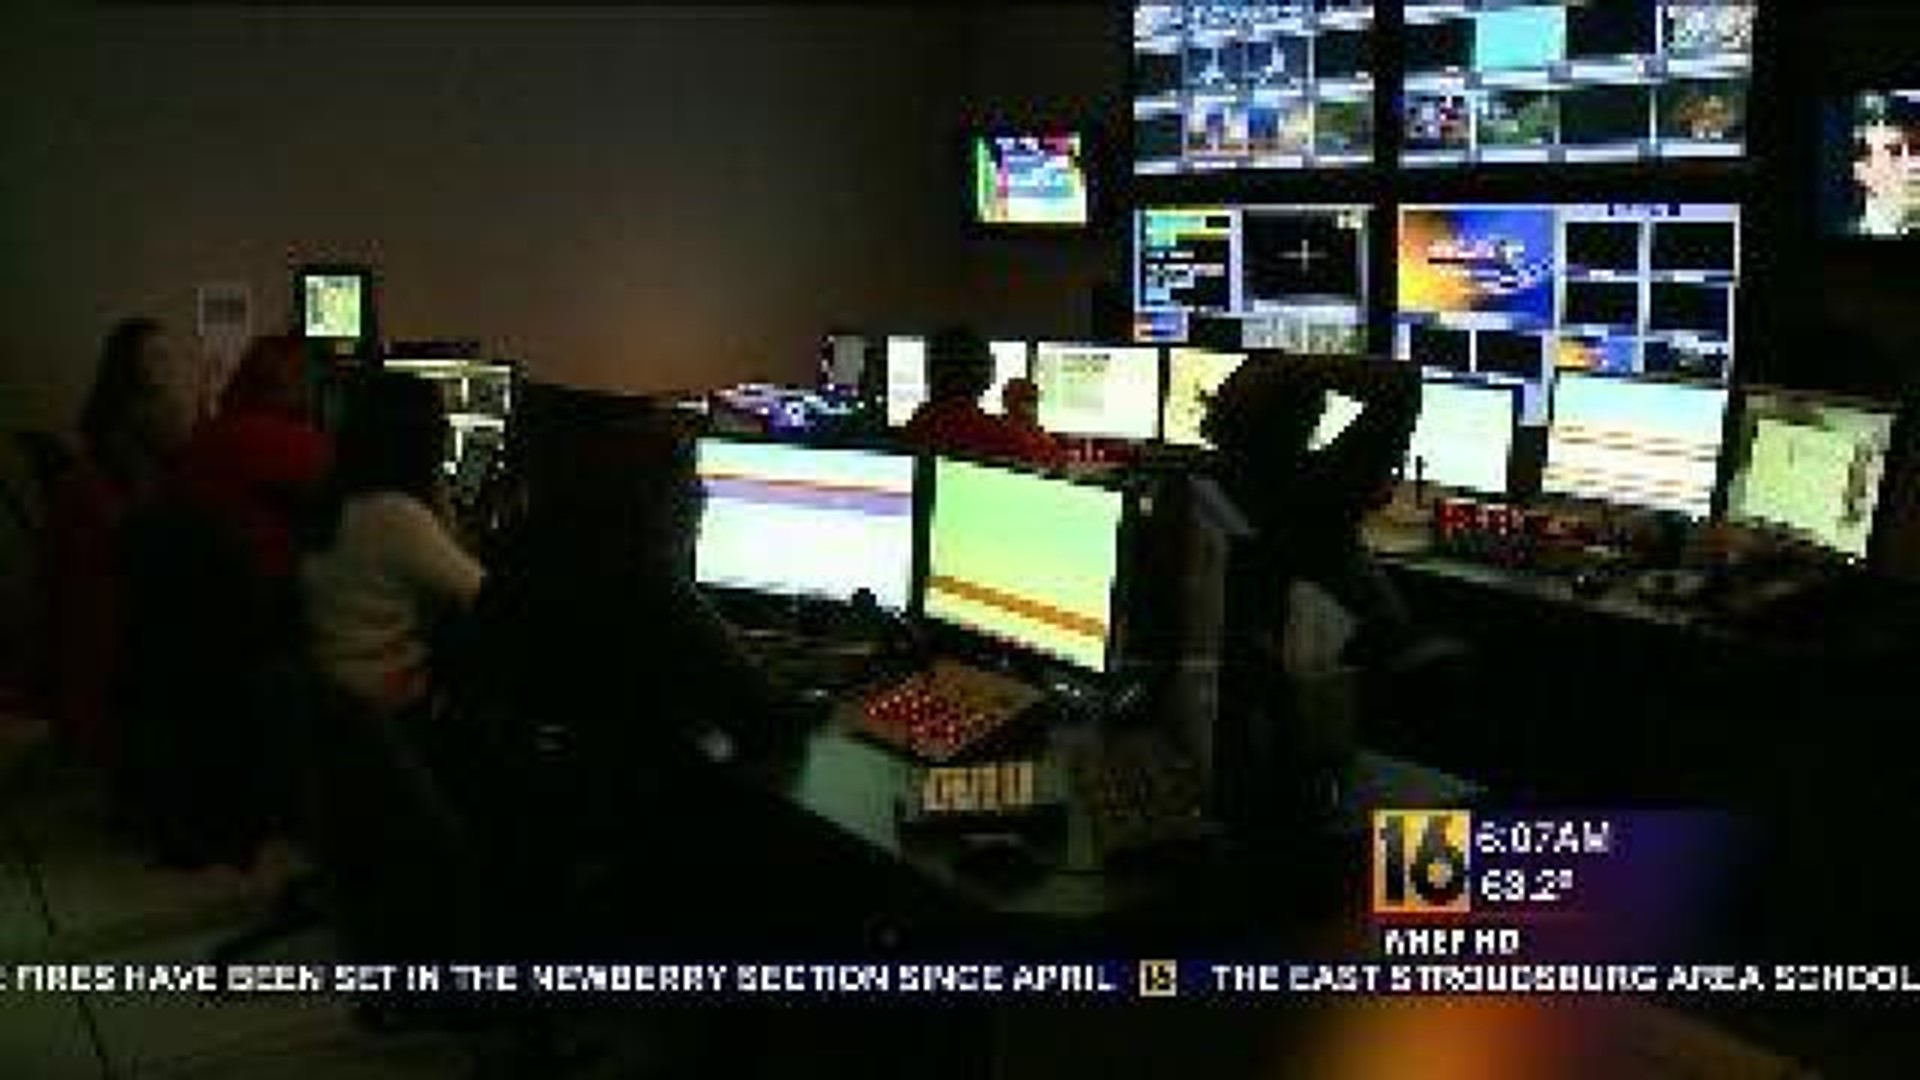 Places You Can't Go: WNEP-TV's HD Control Room